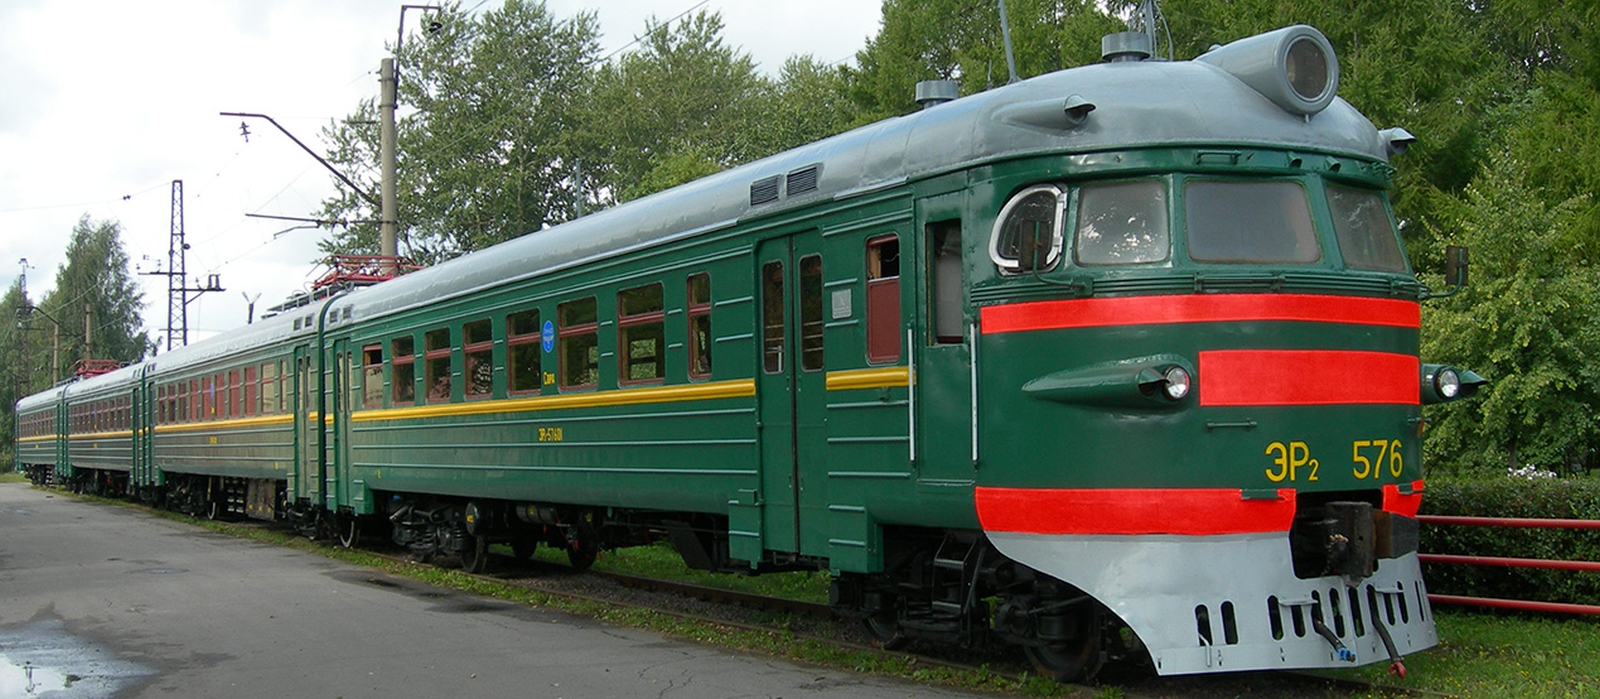 Four-car train parked in Saint Petersburg in 2017